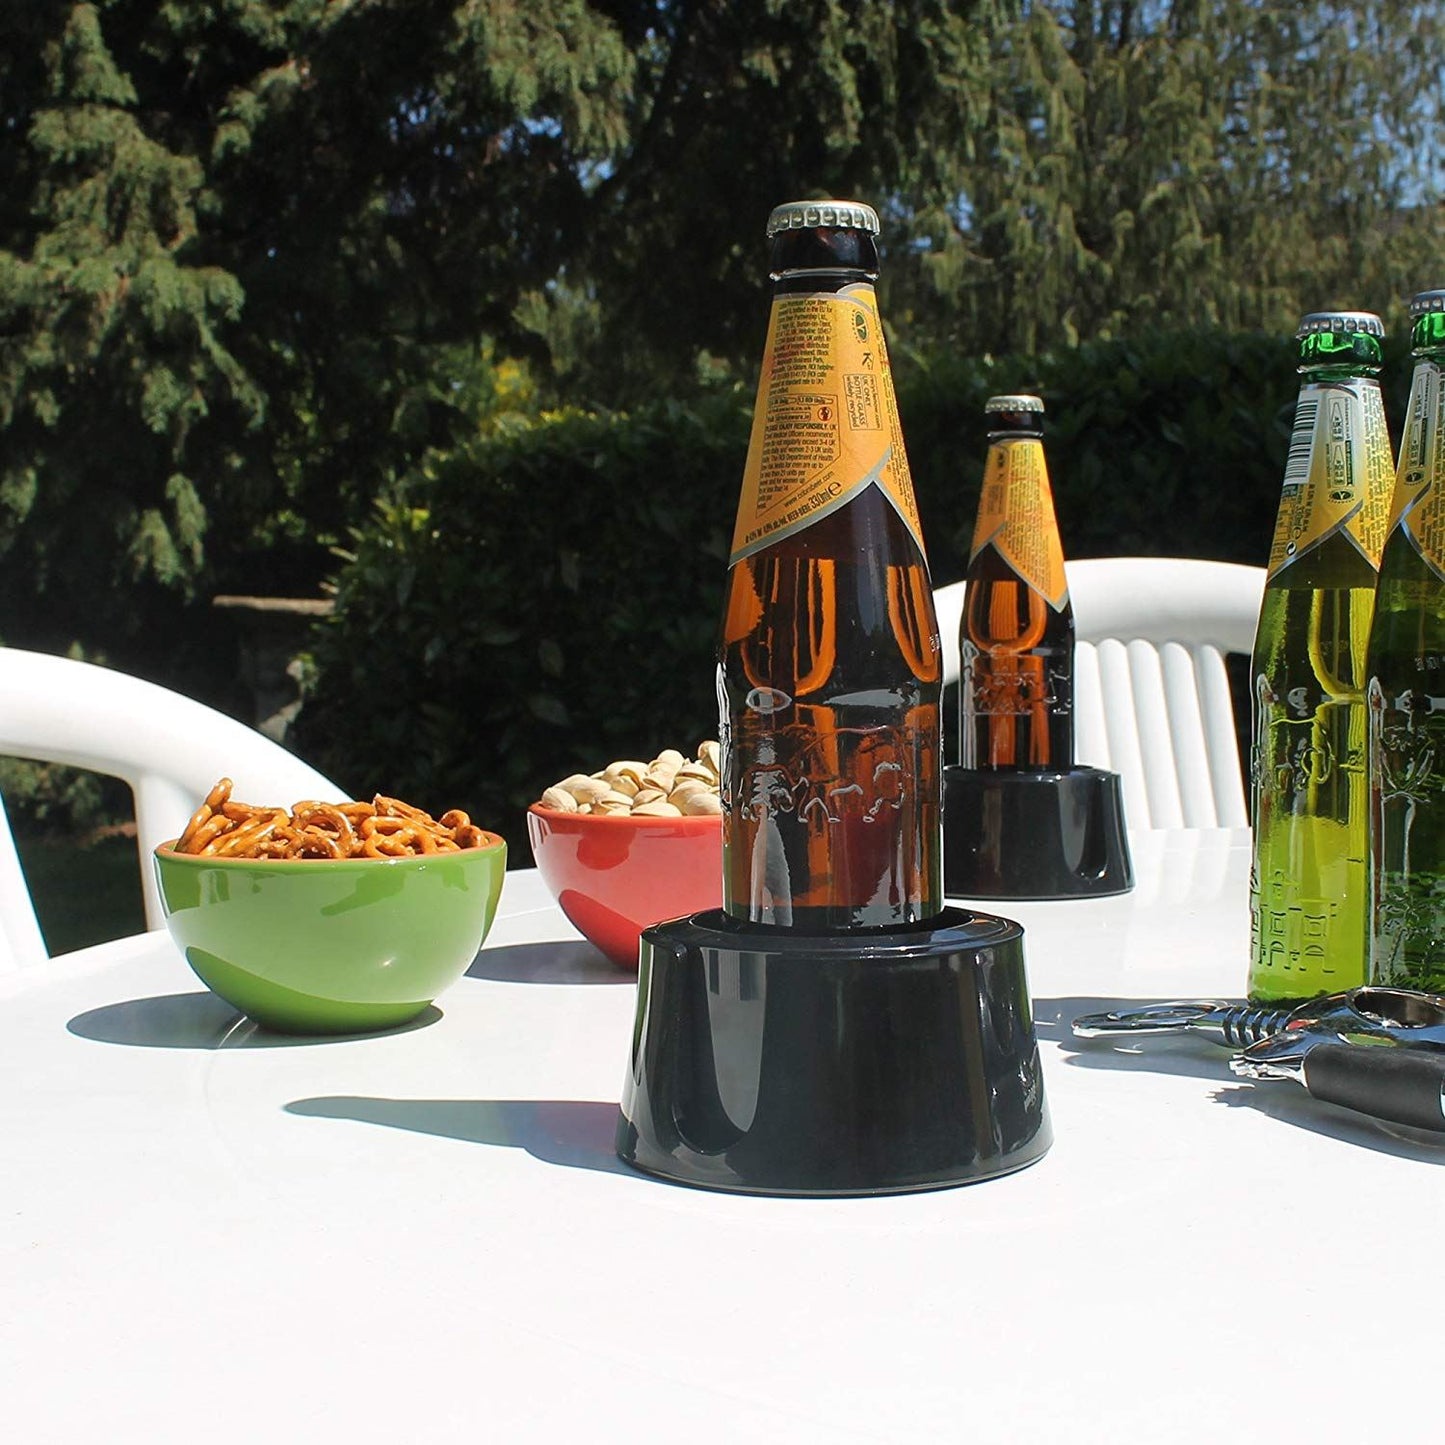 TableCoaster - The ultimate anti-spill drink holder Black or White